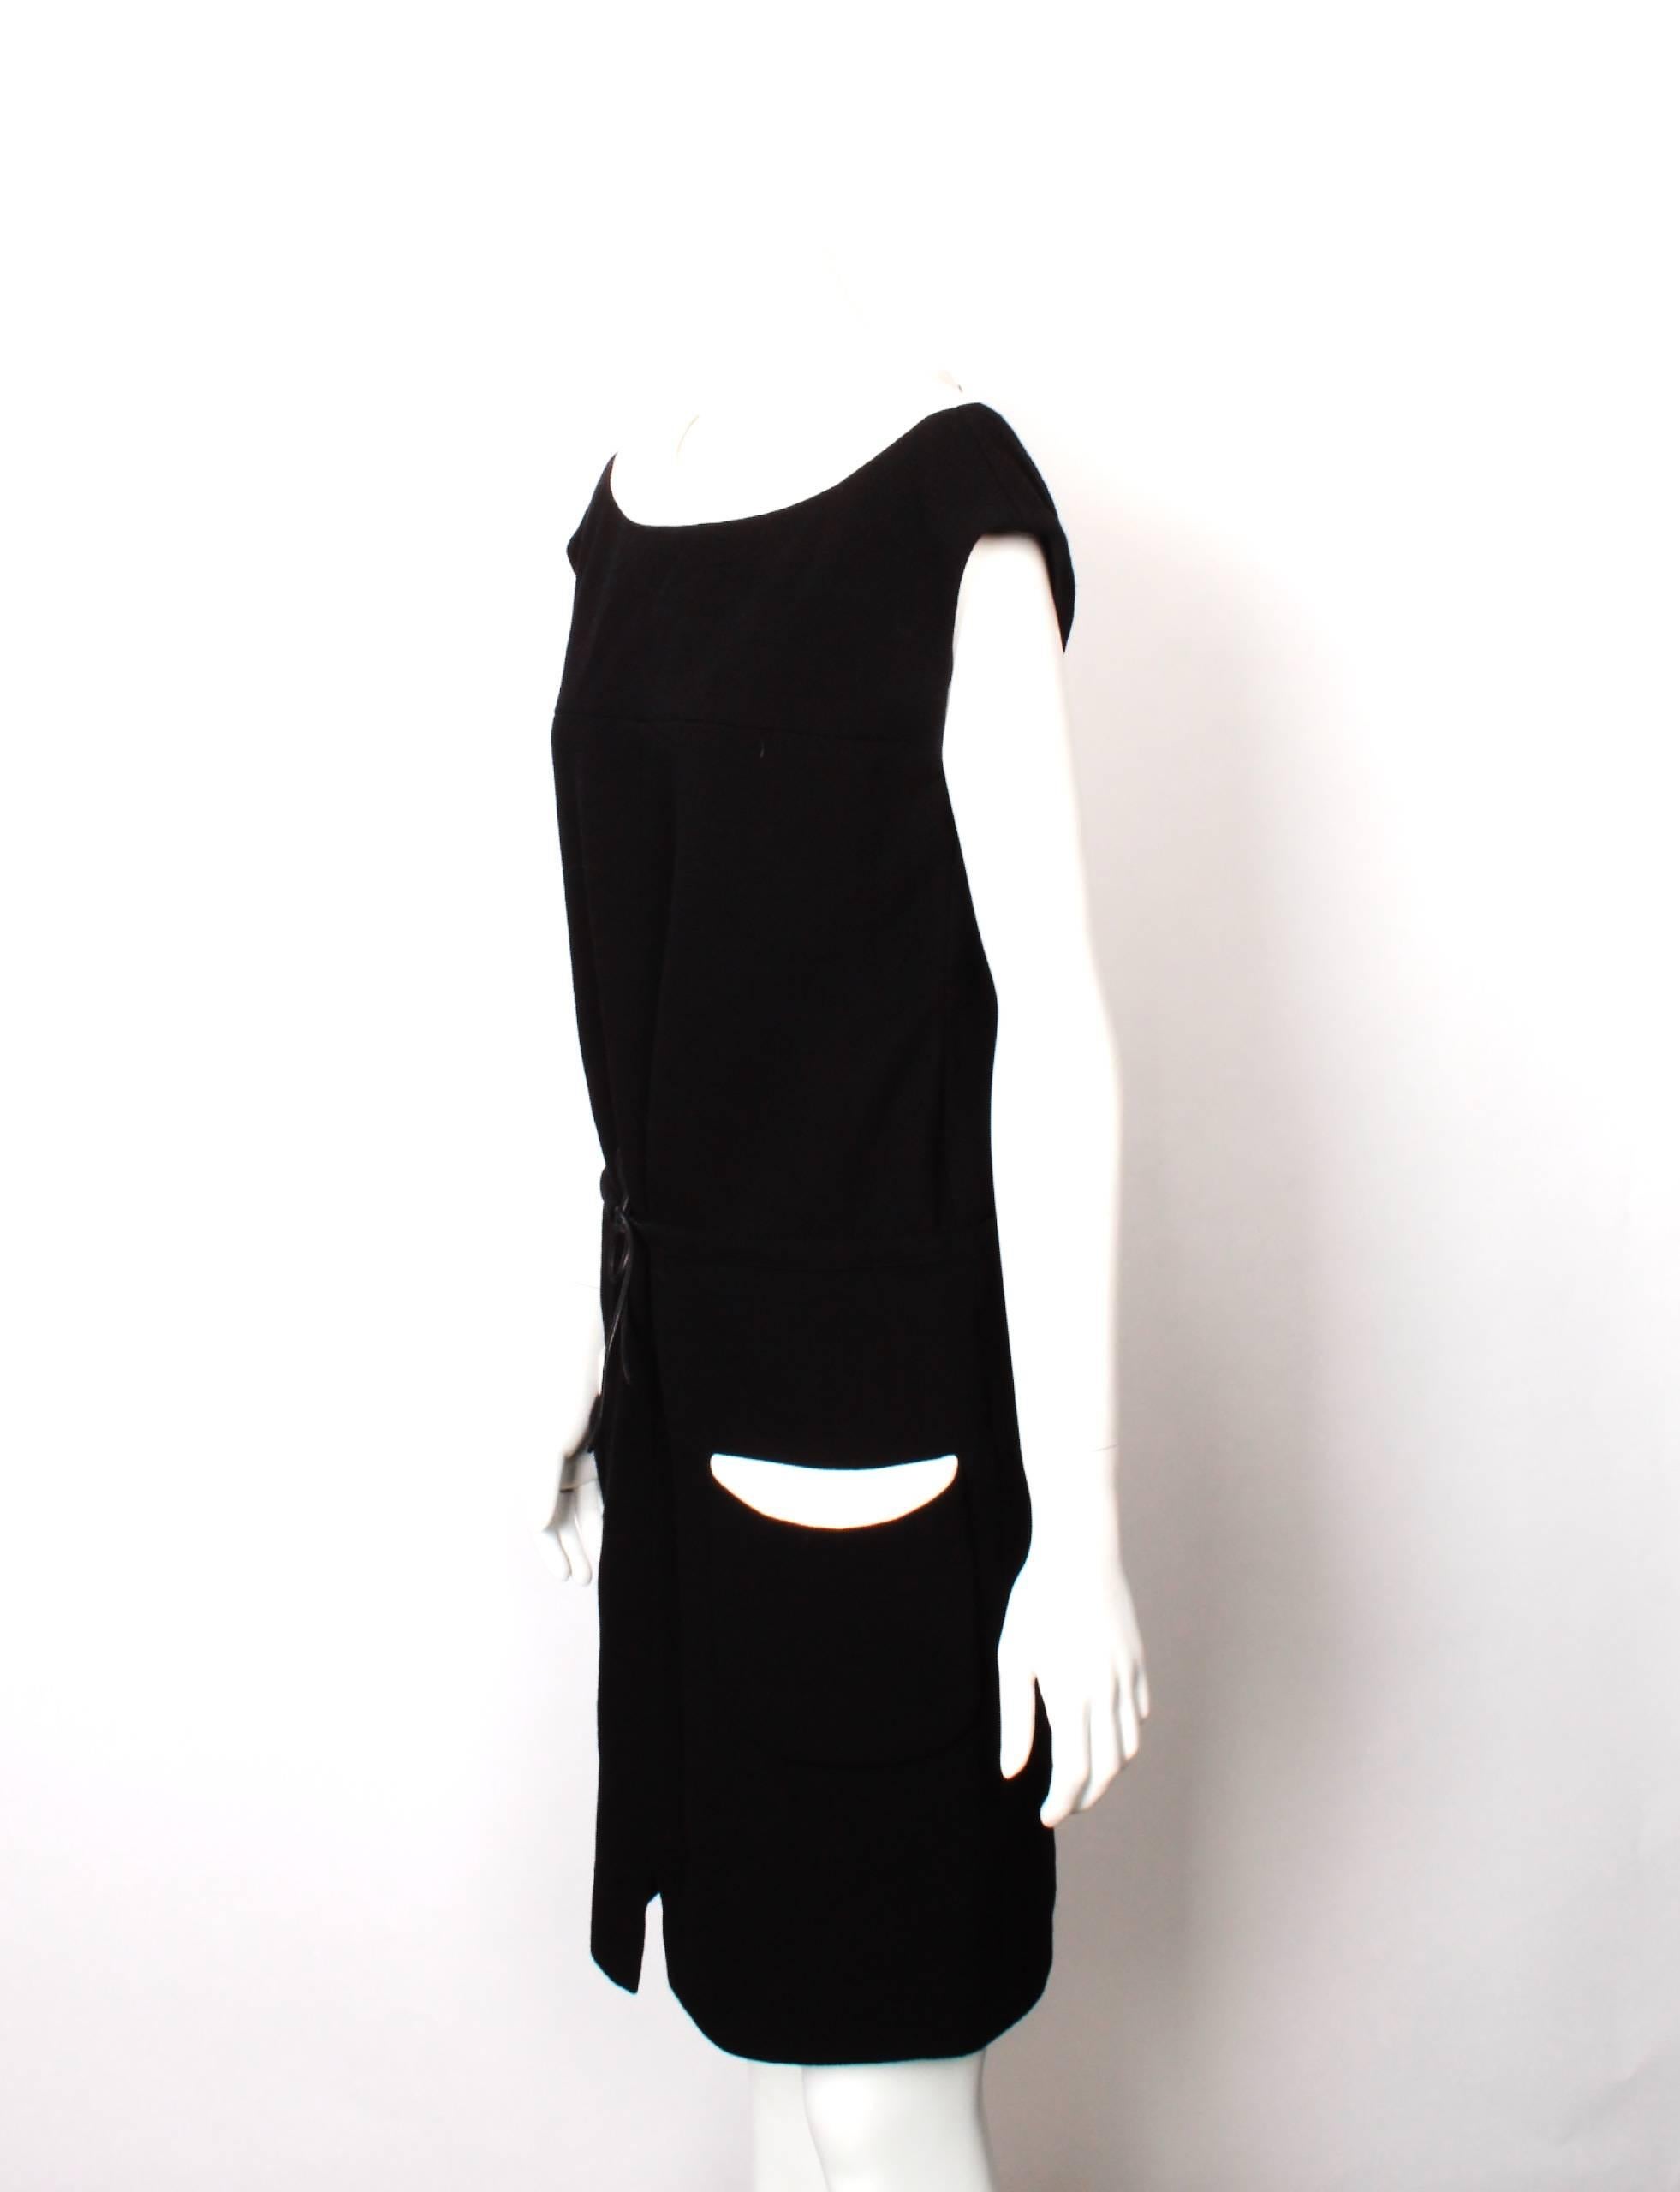 FINAL SALE
Madam Virtue & Co

CHANEL 2 Tone Dress with feature pockets and draw string waist. 
Black and ivory wool crepe with leather cord tie. Feature patch pockets are functional but have never been unpicked. Fully lined in custom Chanel embossed